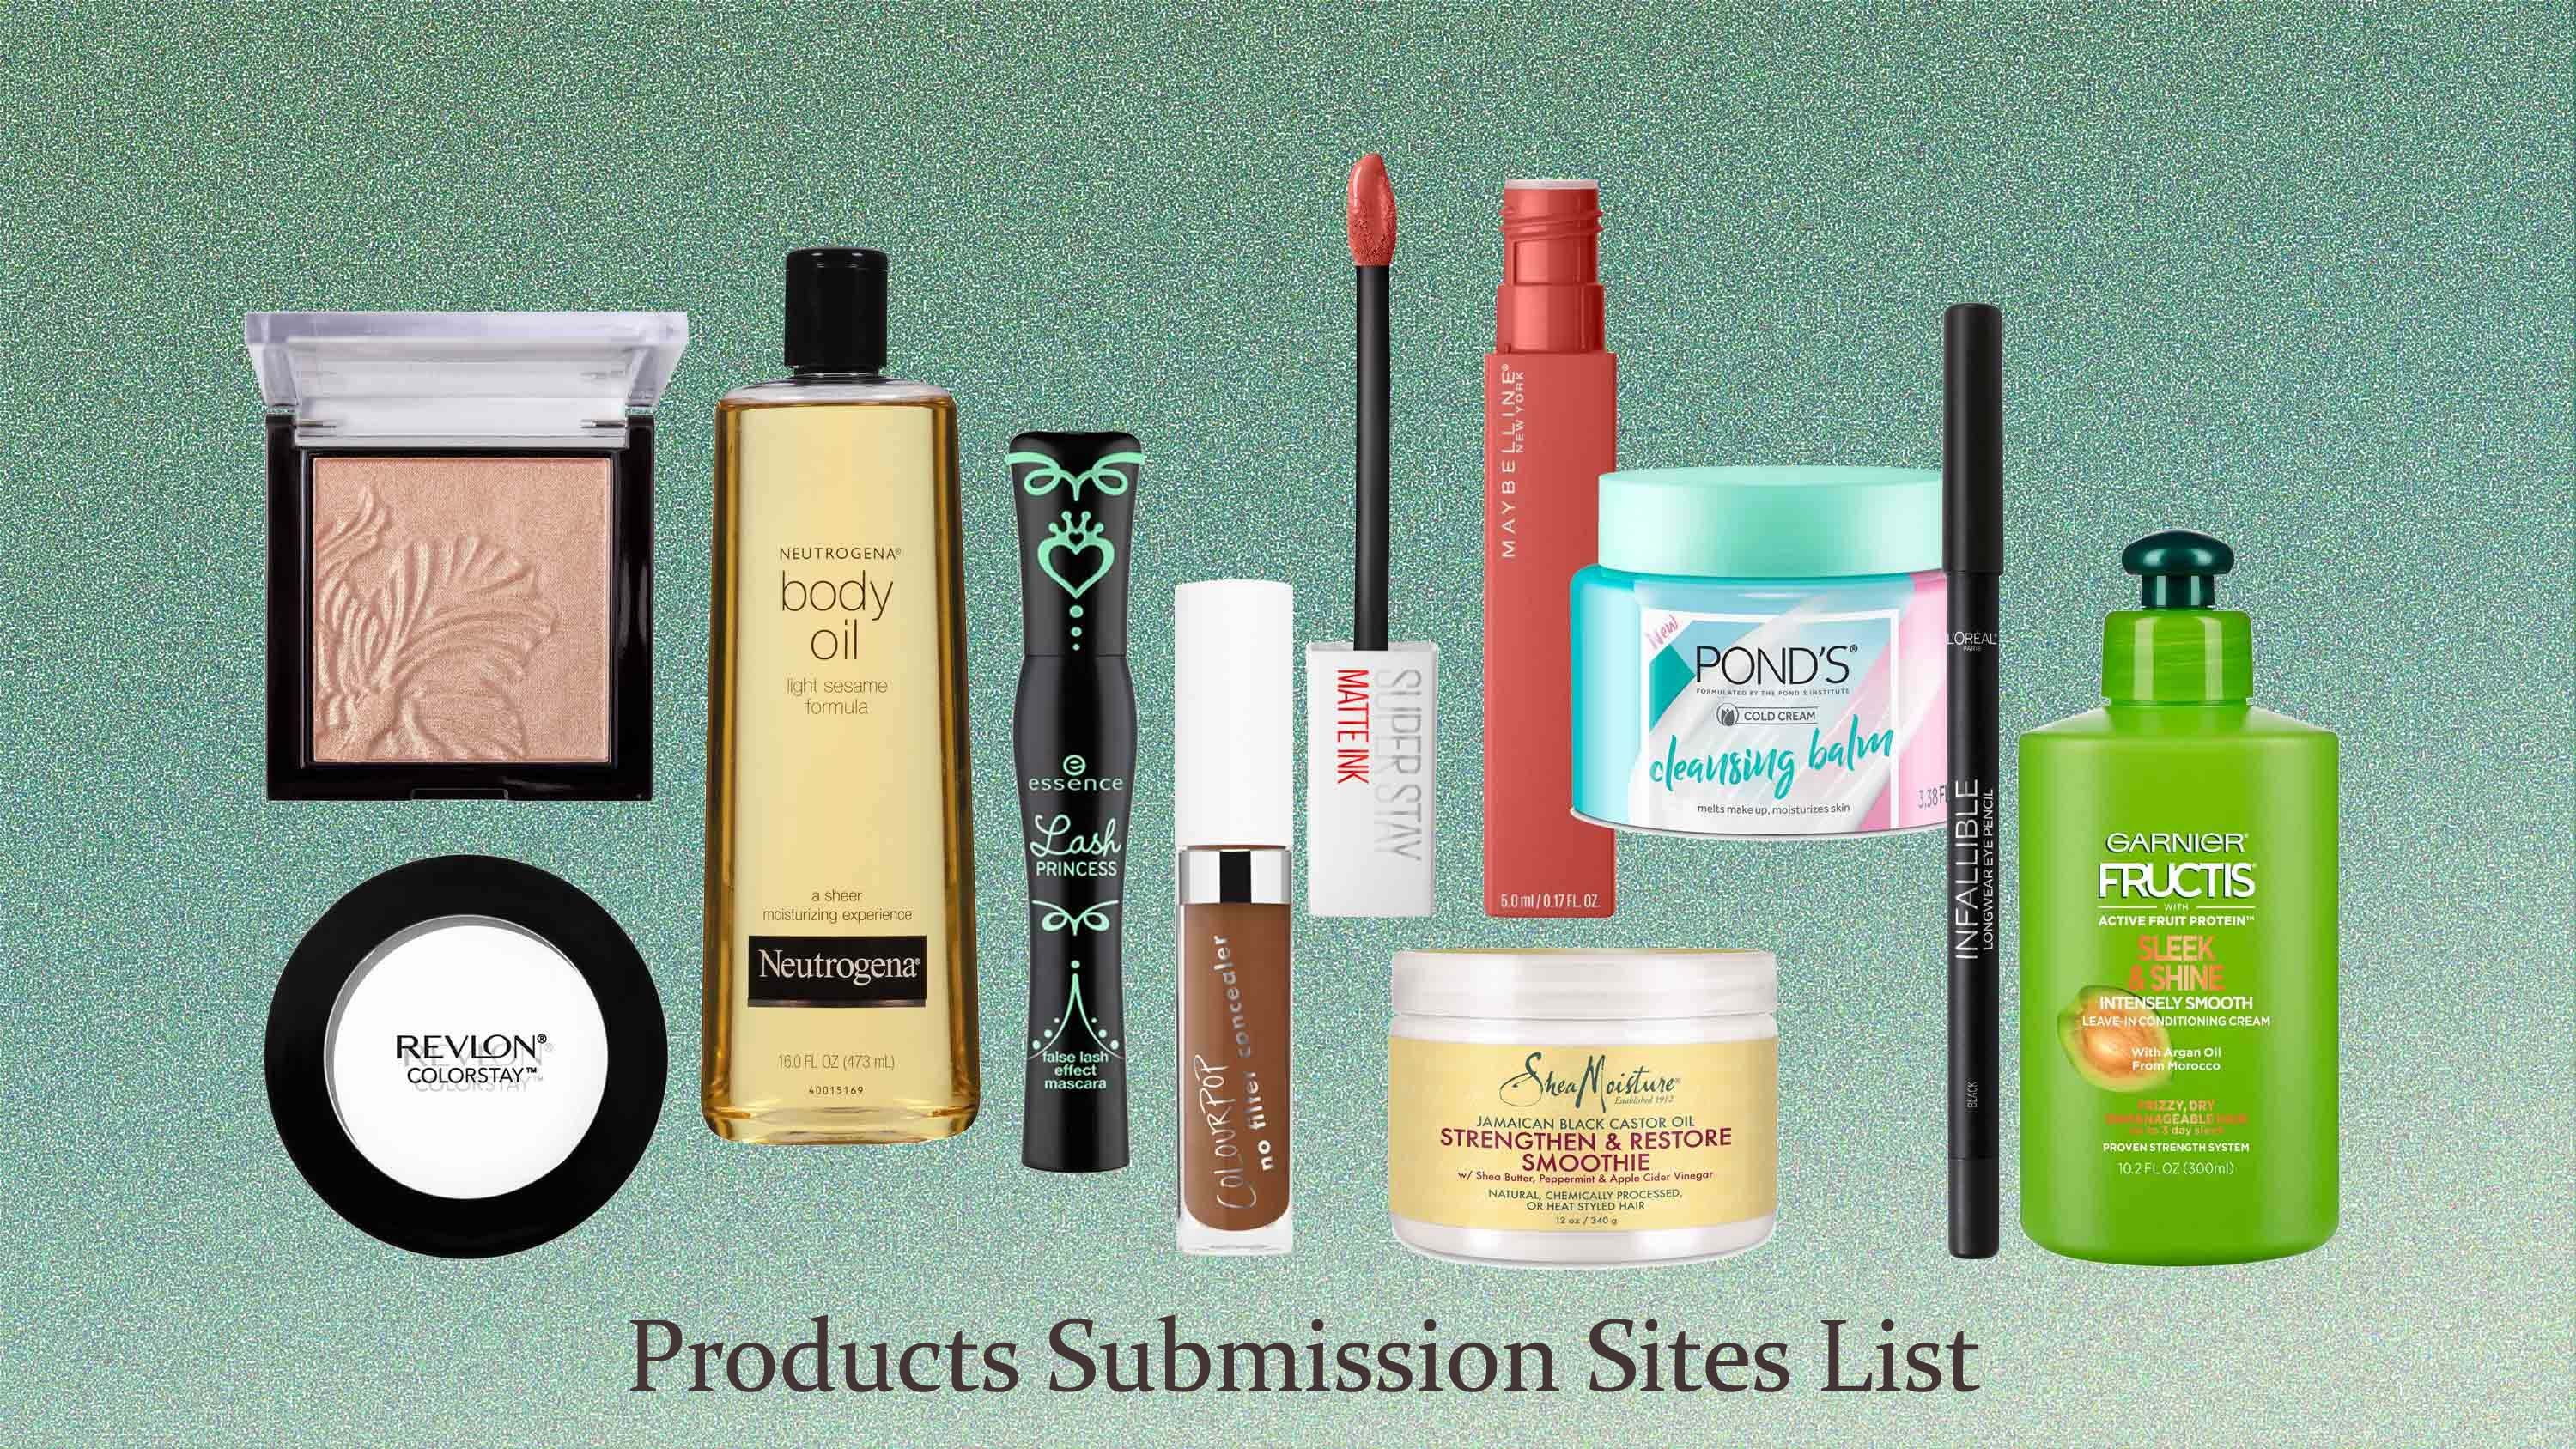 Product Submission Sites List